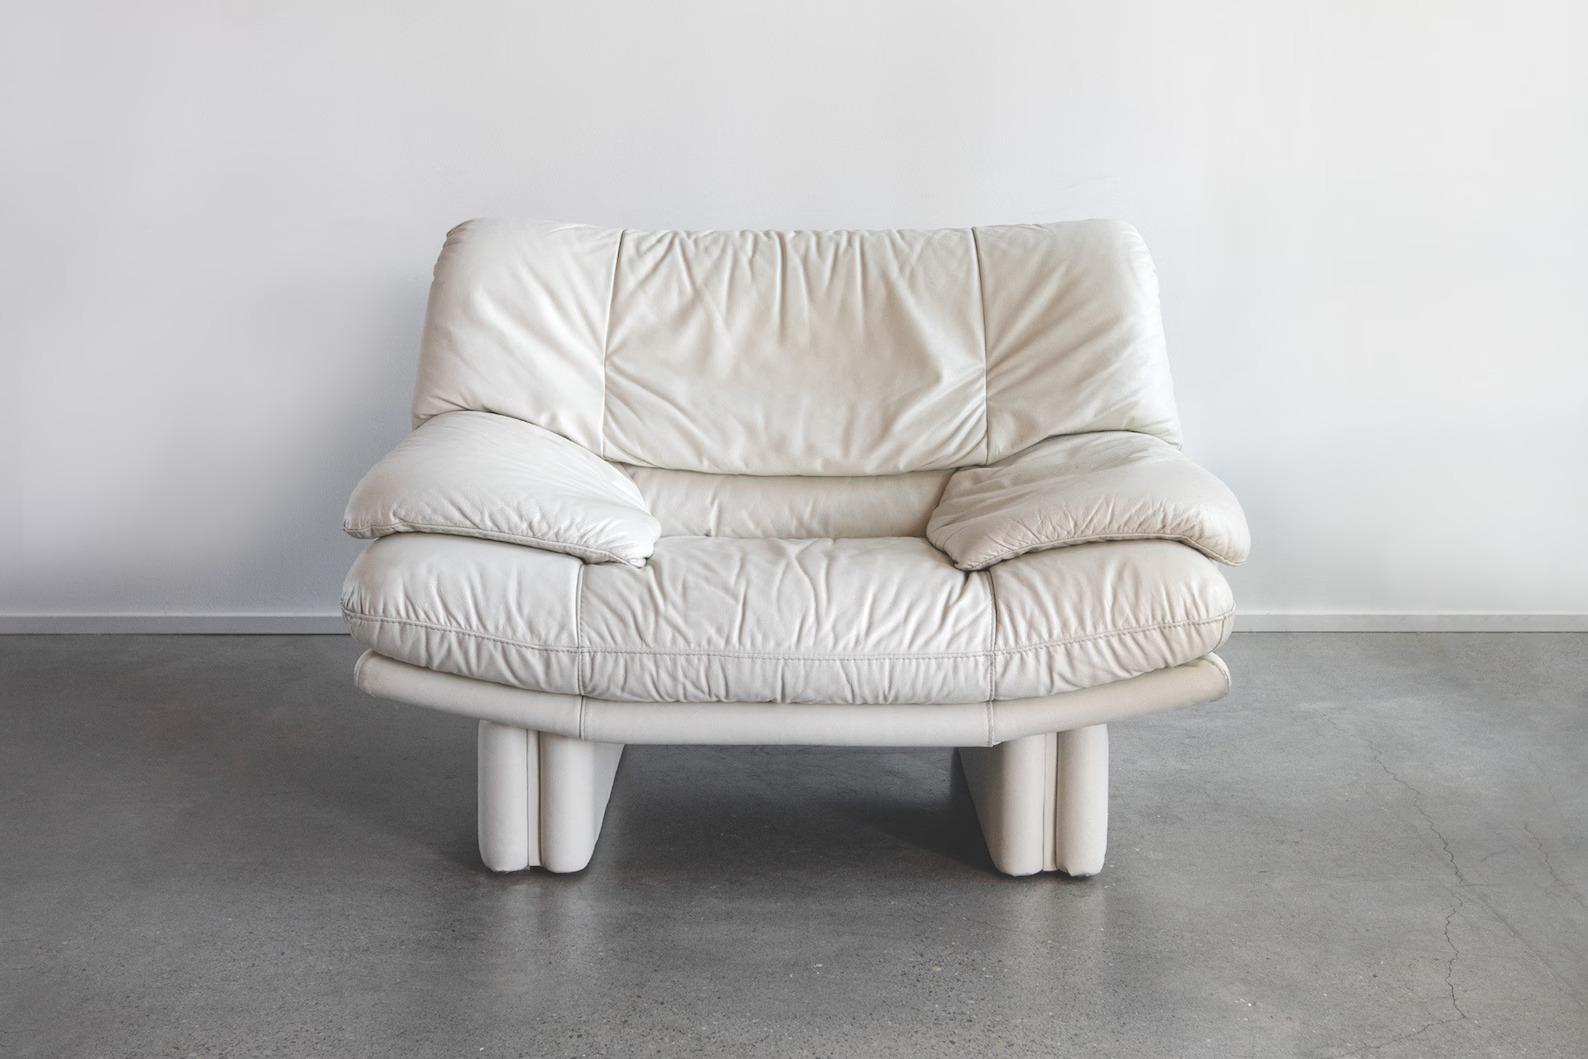 Sink in and feel like you're on a cloud with this stunning postmodern Nicoletti Salotti Italian leather chair in gorgeous a off-white cream. A statement piece in your living room or anywhere you decide to put it. Would pair nicely with modern day,